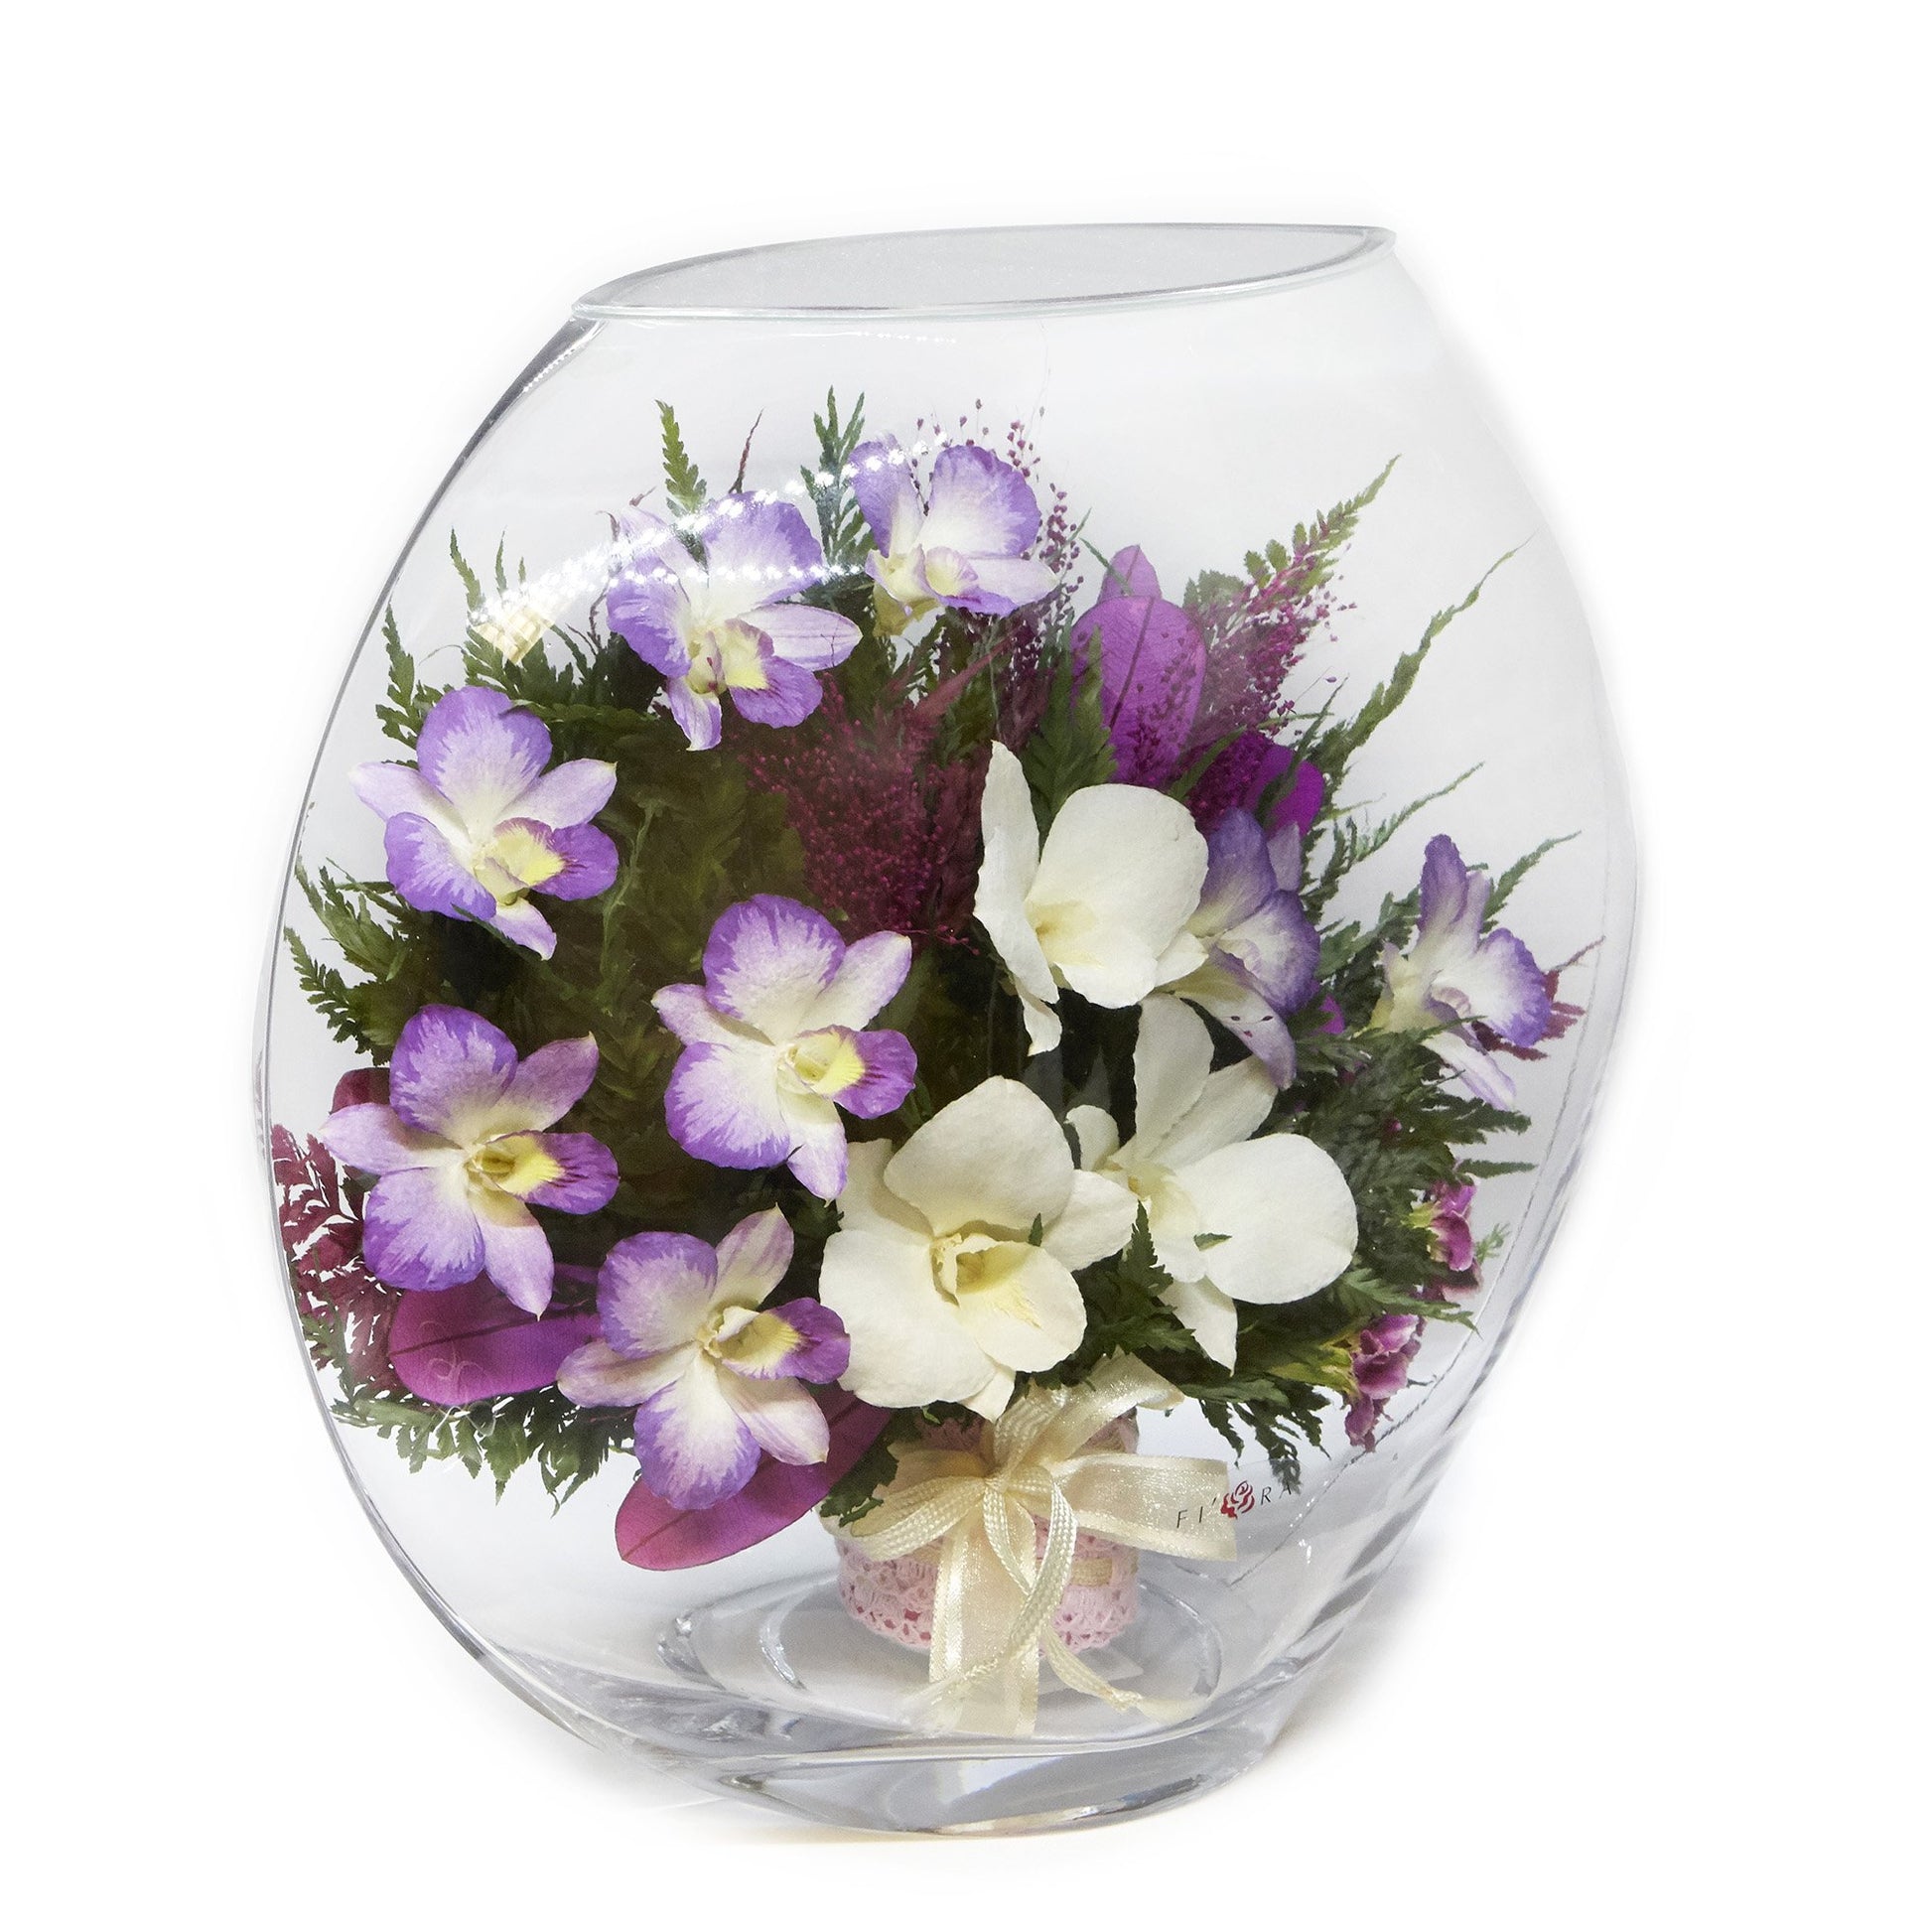 43918 Long-Lasting Orchids in a Large Glass Vase - FIORA FLOWER